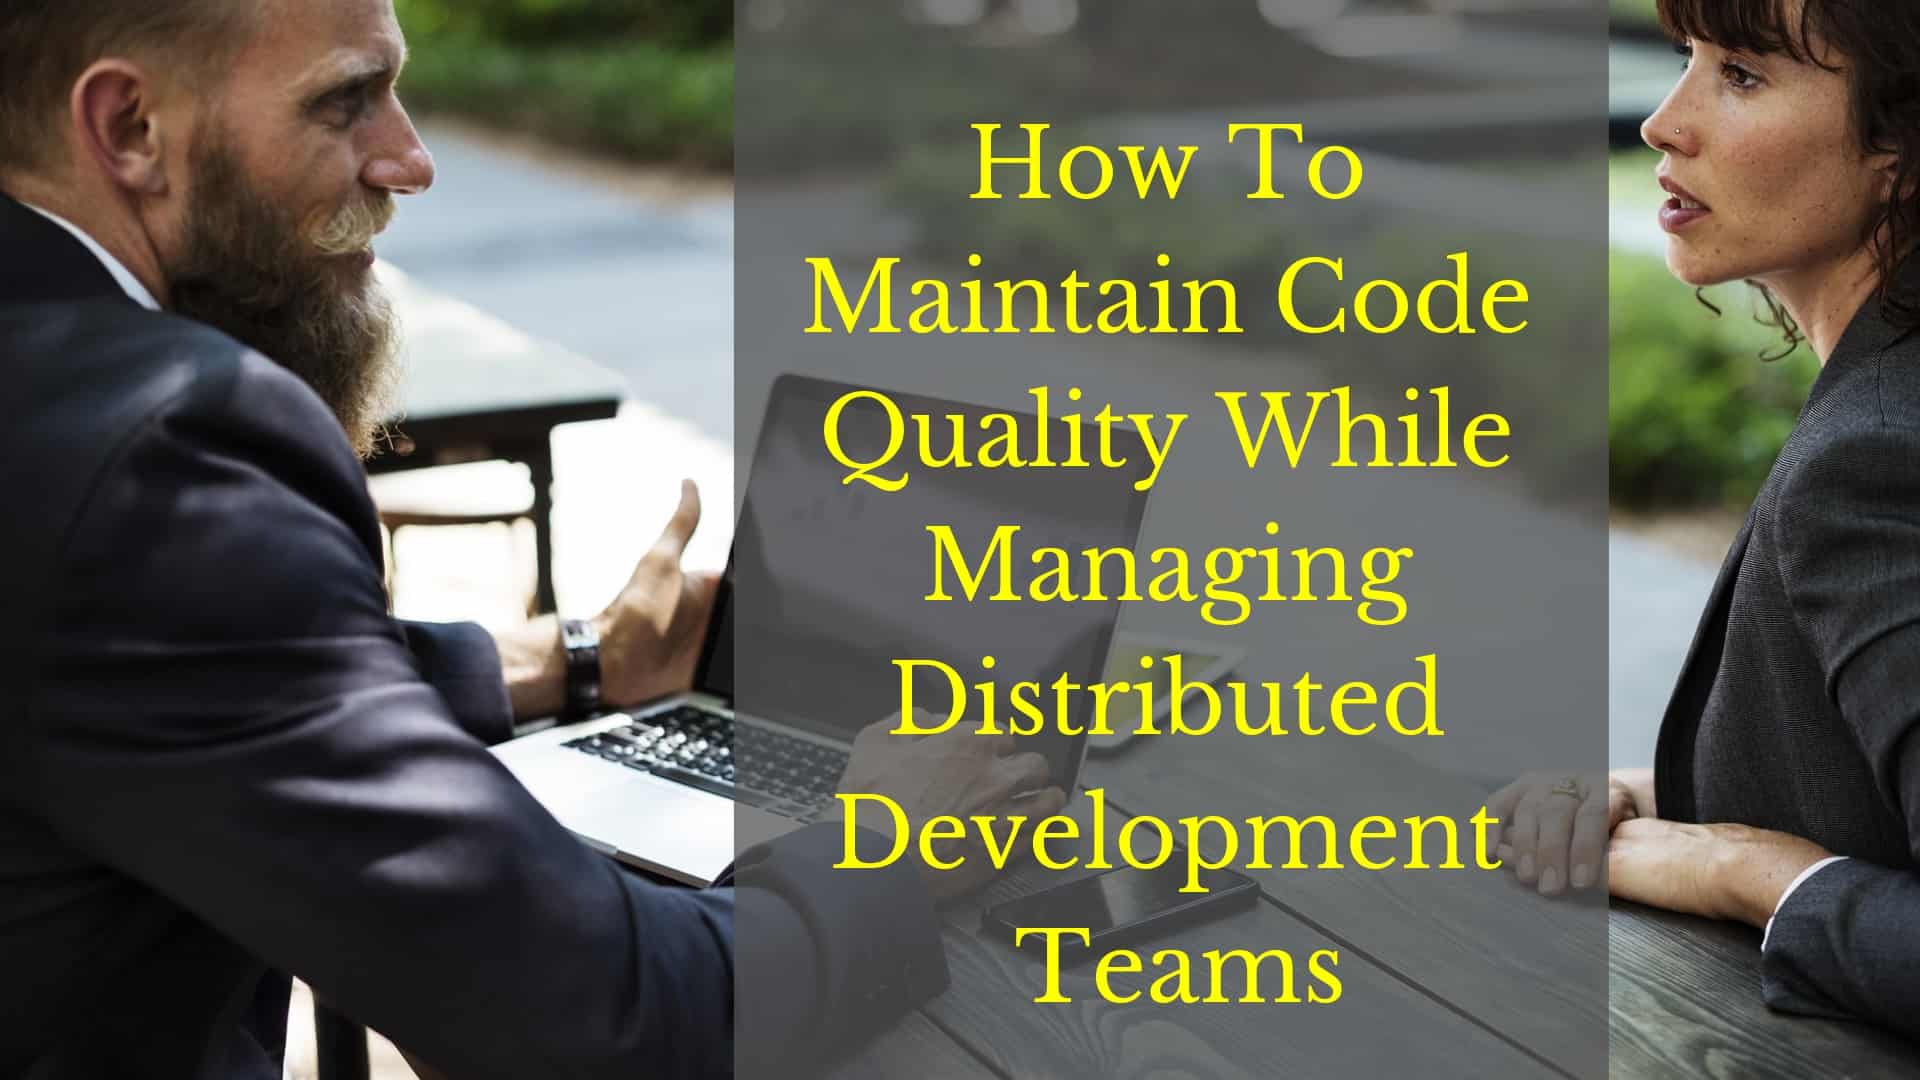 How To Maintain Code Quality While Managing Distributed Development Teams